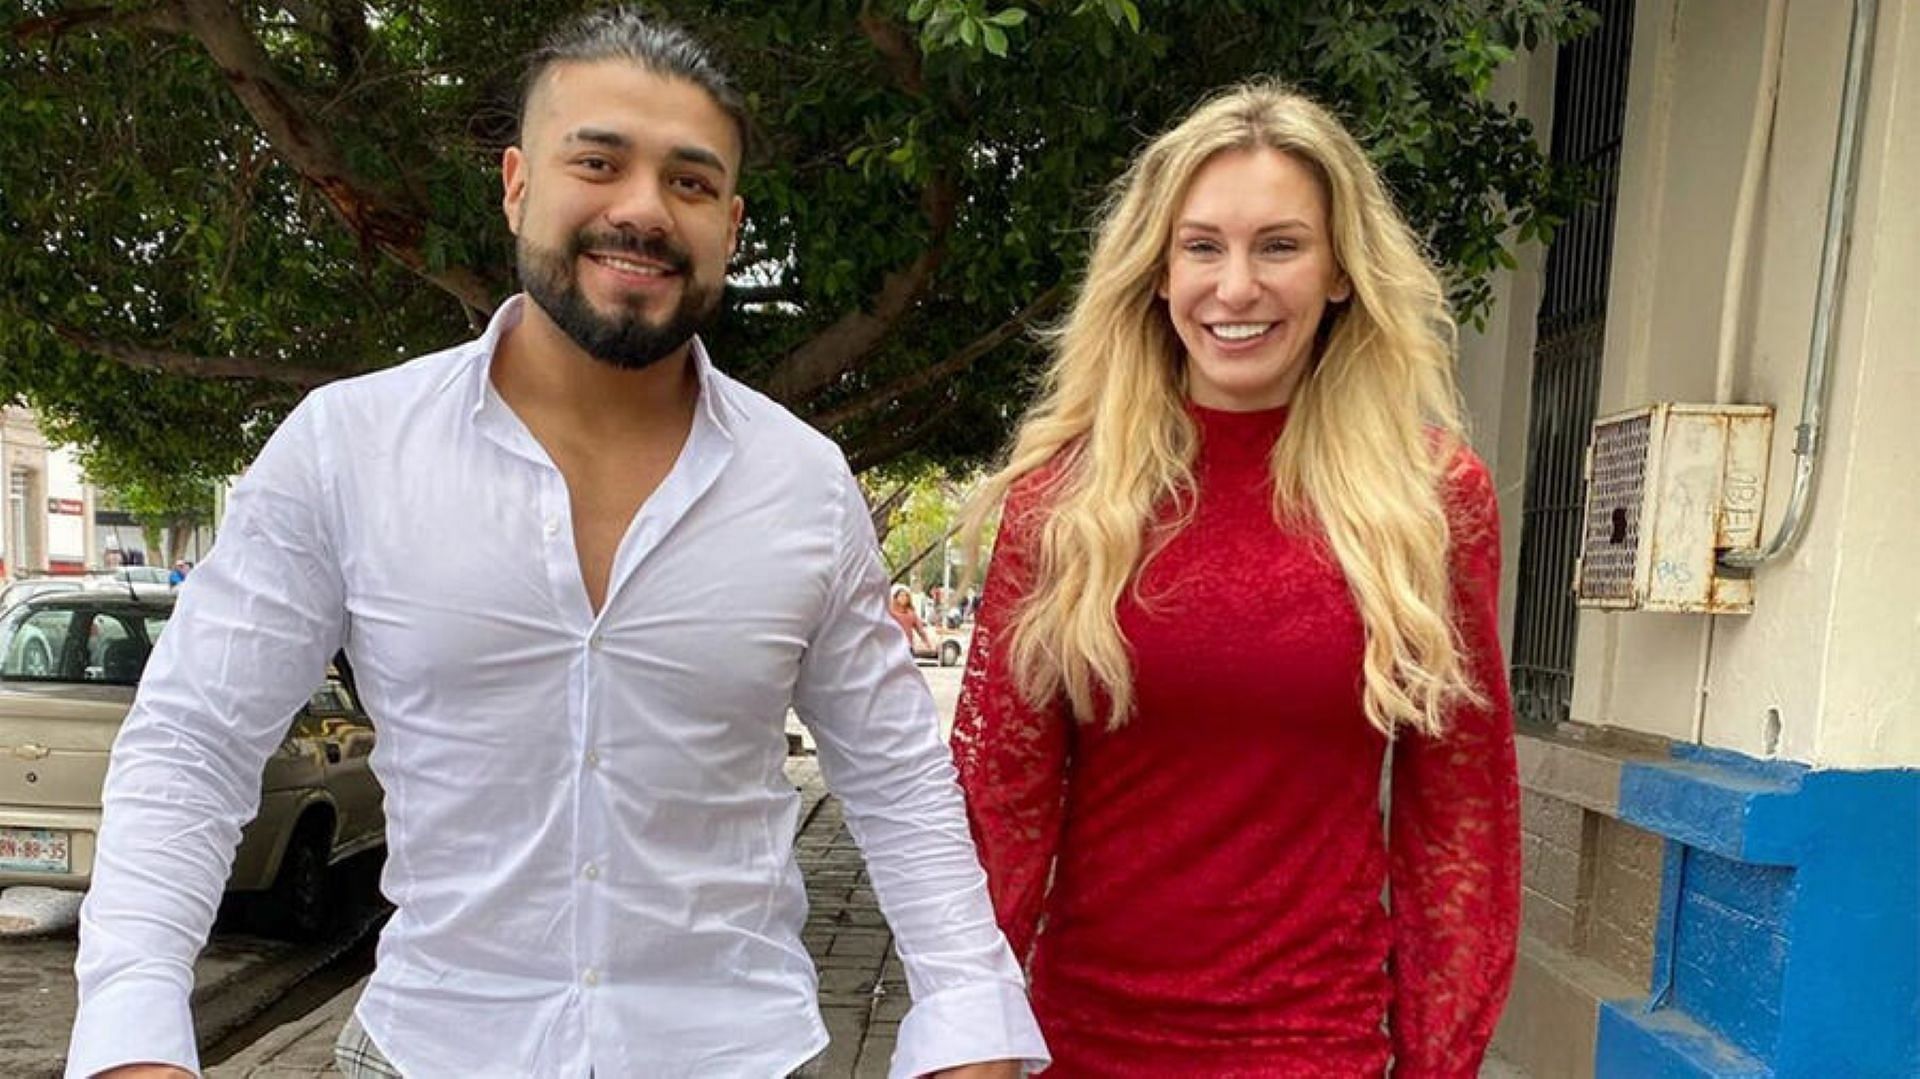 Charlotte Flair and Andrade are a power couple in WWE